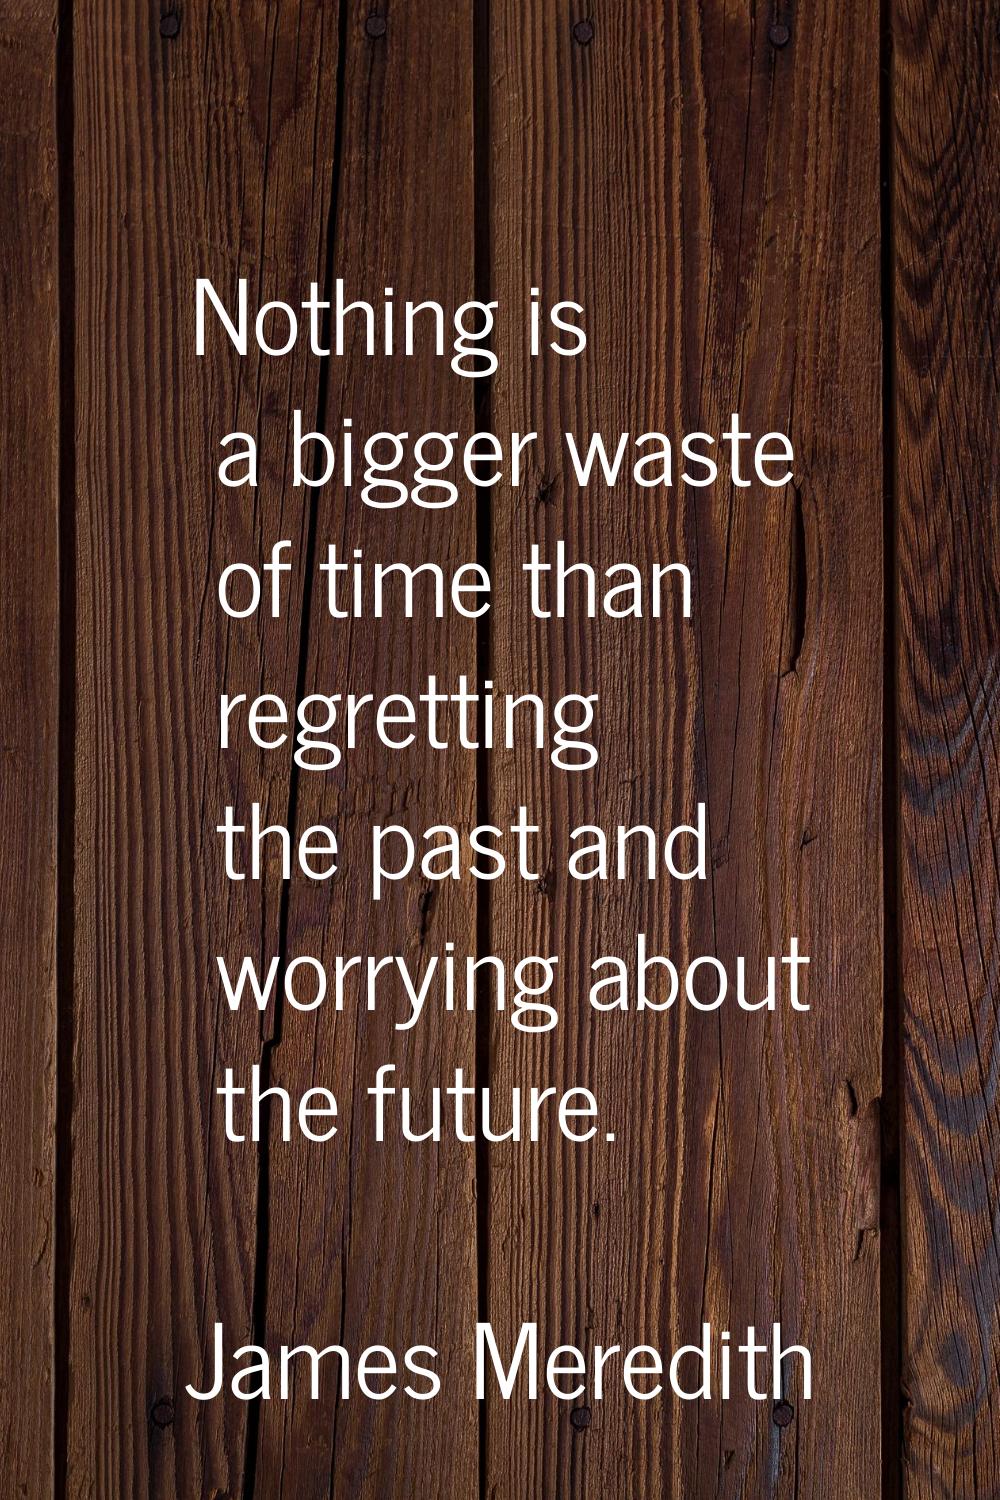 Nothing is a bigger waste of time than regretting the past and worrying about the future.